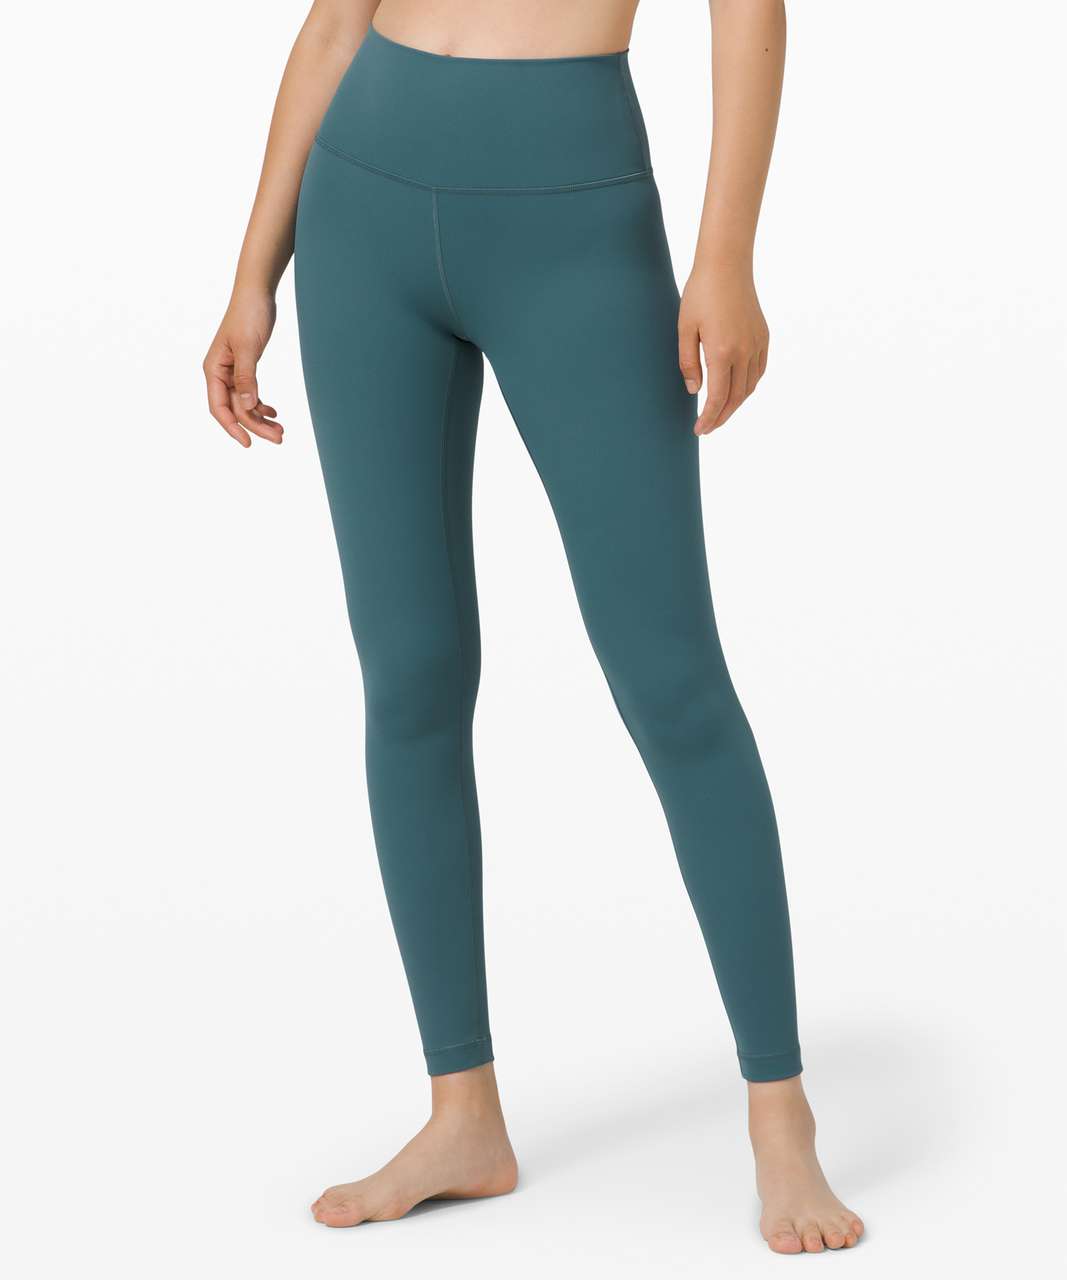 Lululemon wunder under in nocturnal teal - size 6, Men's Fashion,  Activewear on Carousell